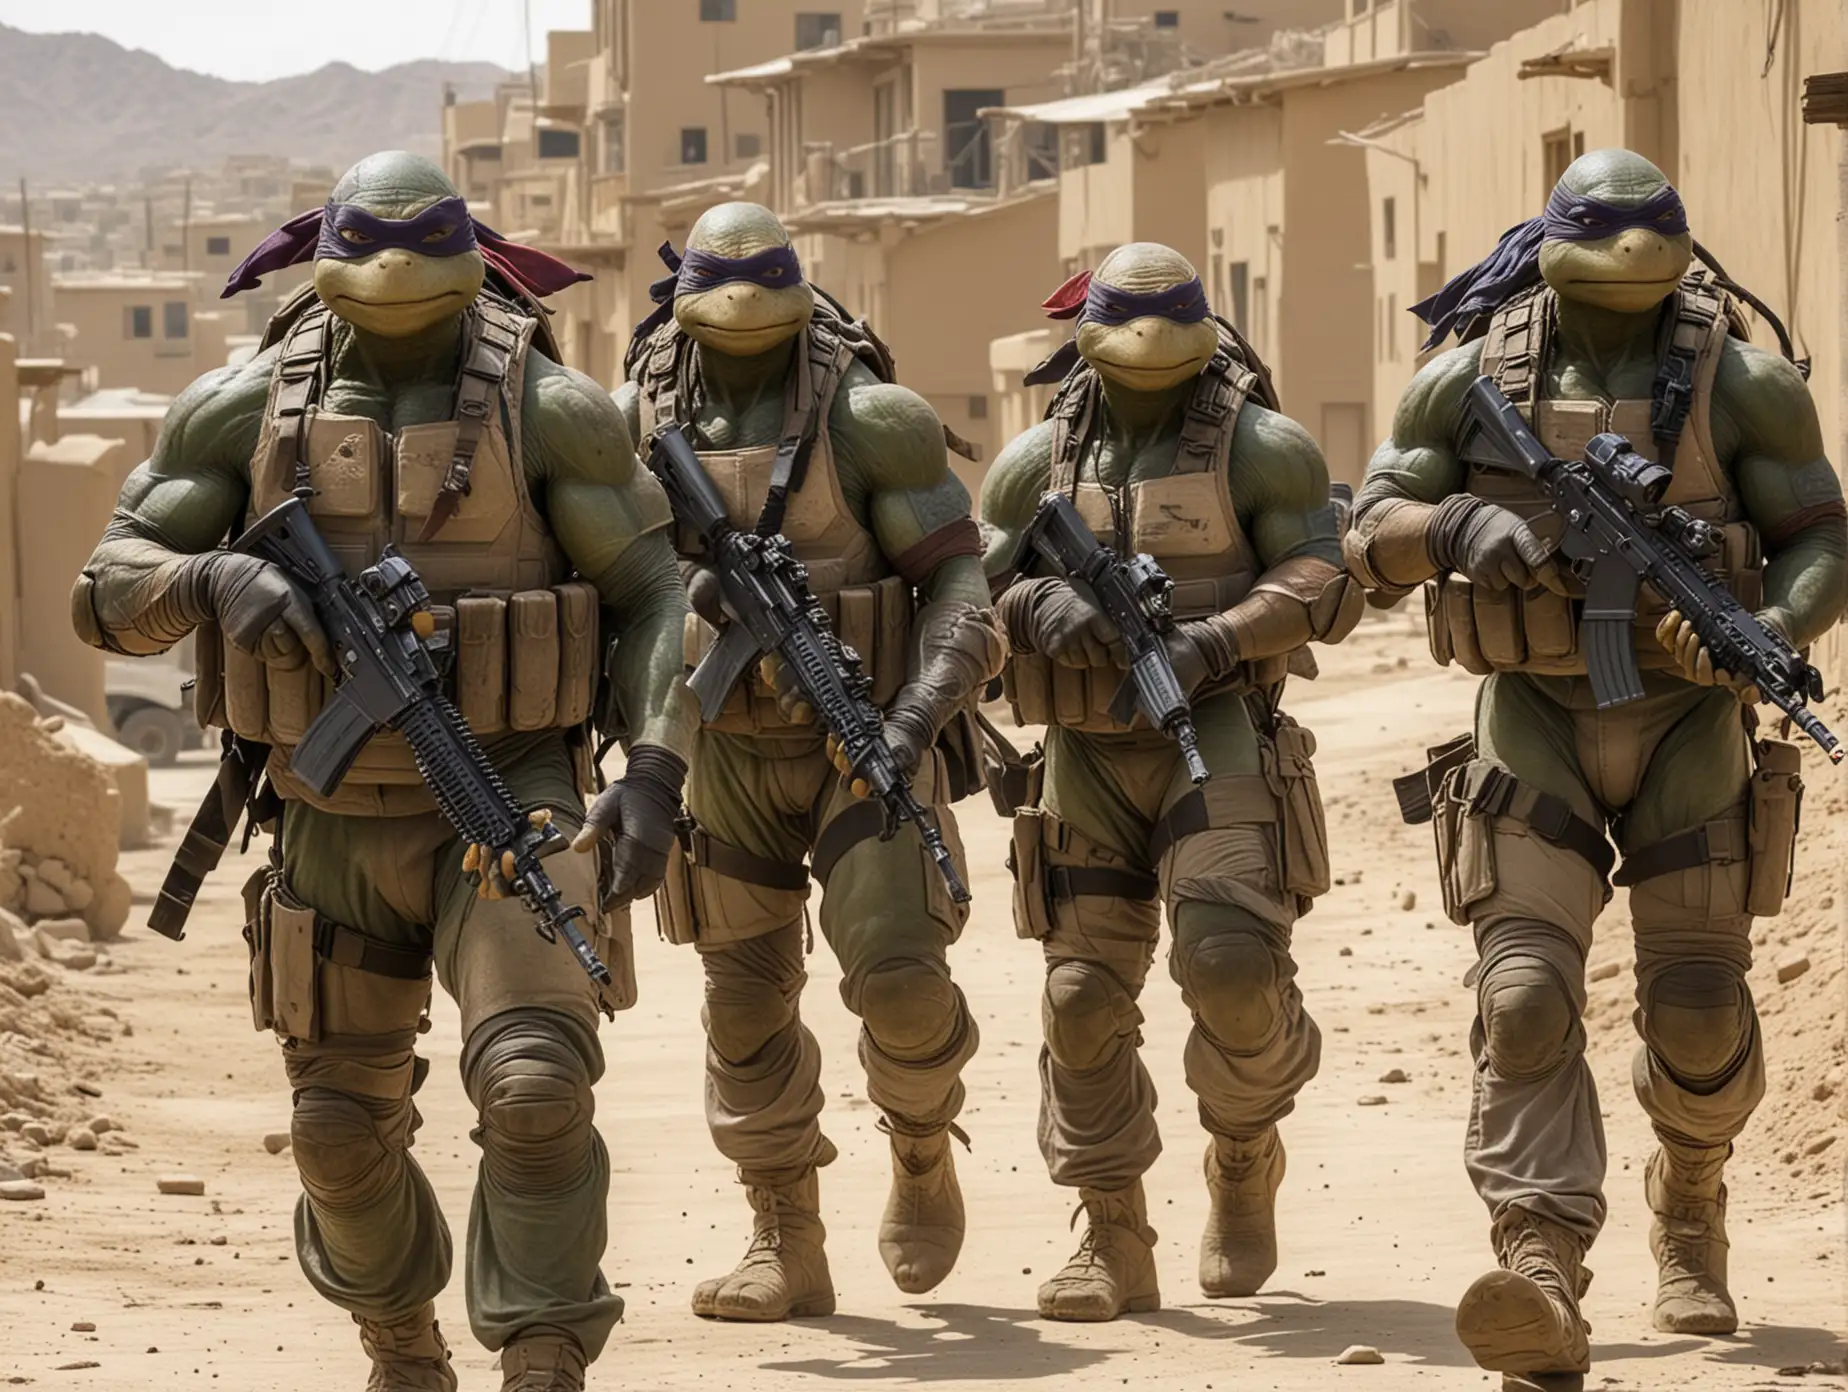 The Ninja Turtles join the Navy Seals, on deployment in Afghanistan, patrolling a village, all are wearing combat helmets 